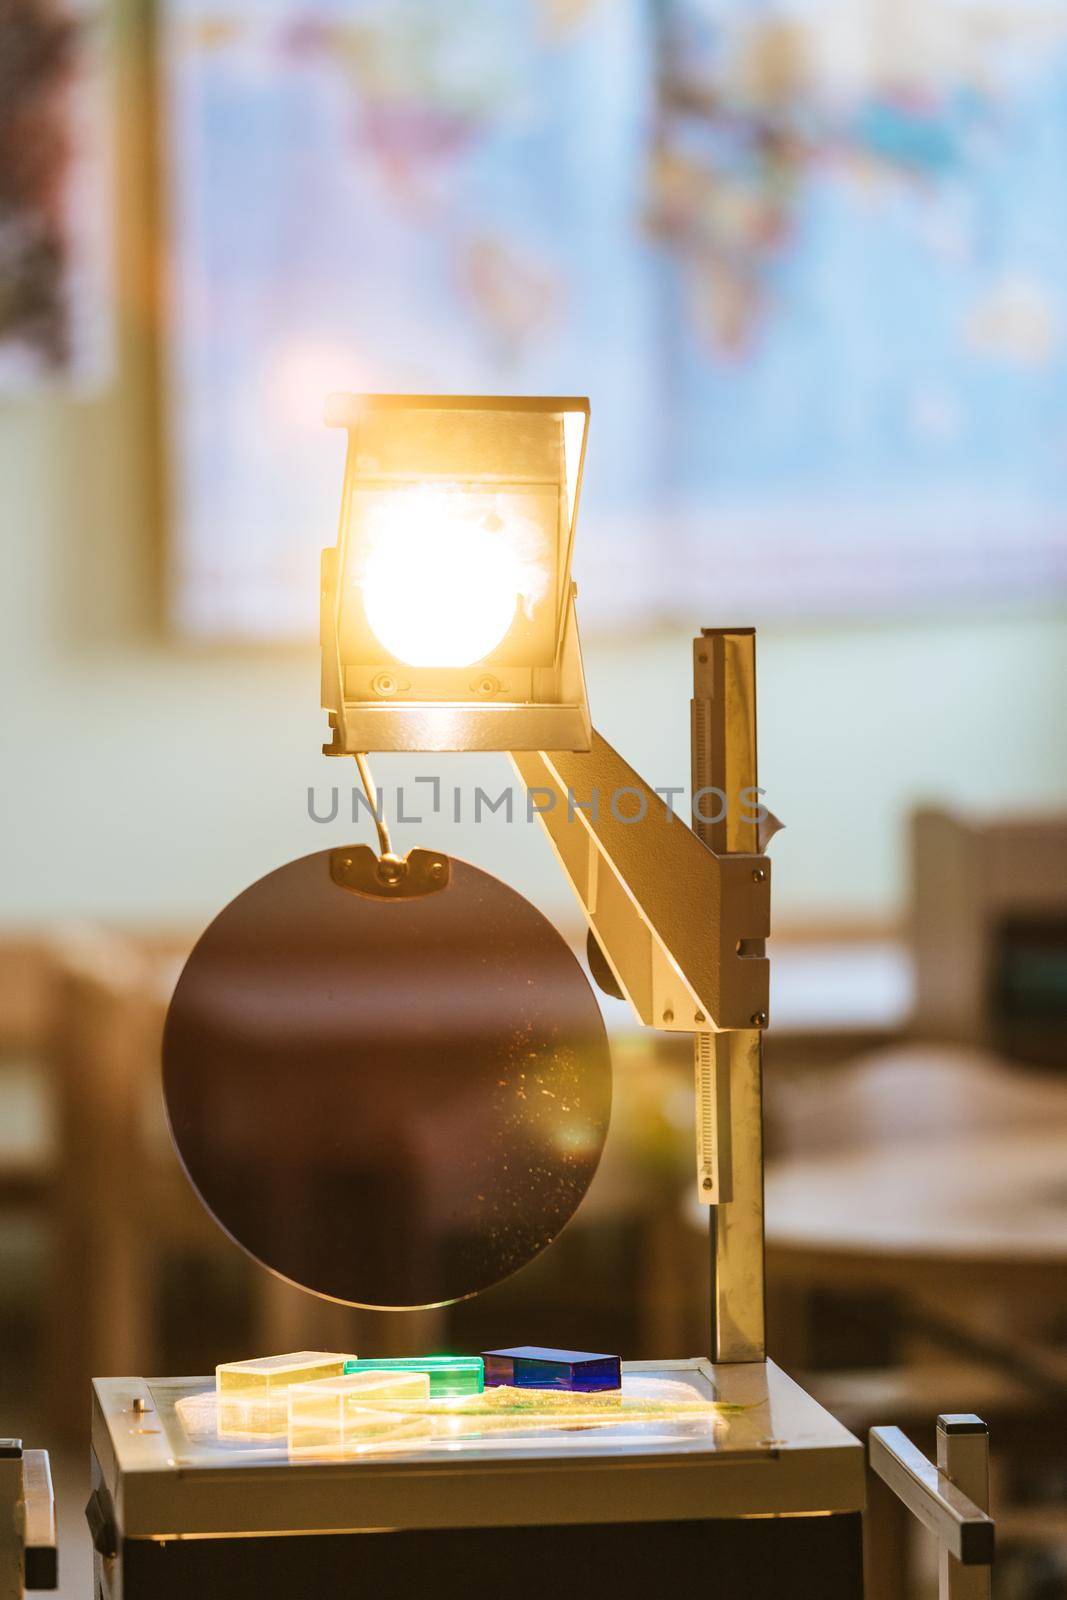 Schooling concept: Retro overhead projector in classroom, educational system by Daxenbichler